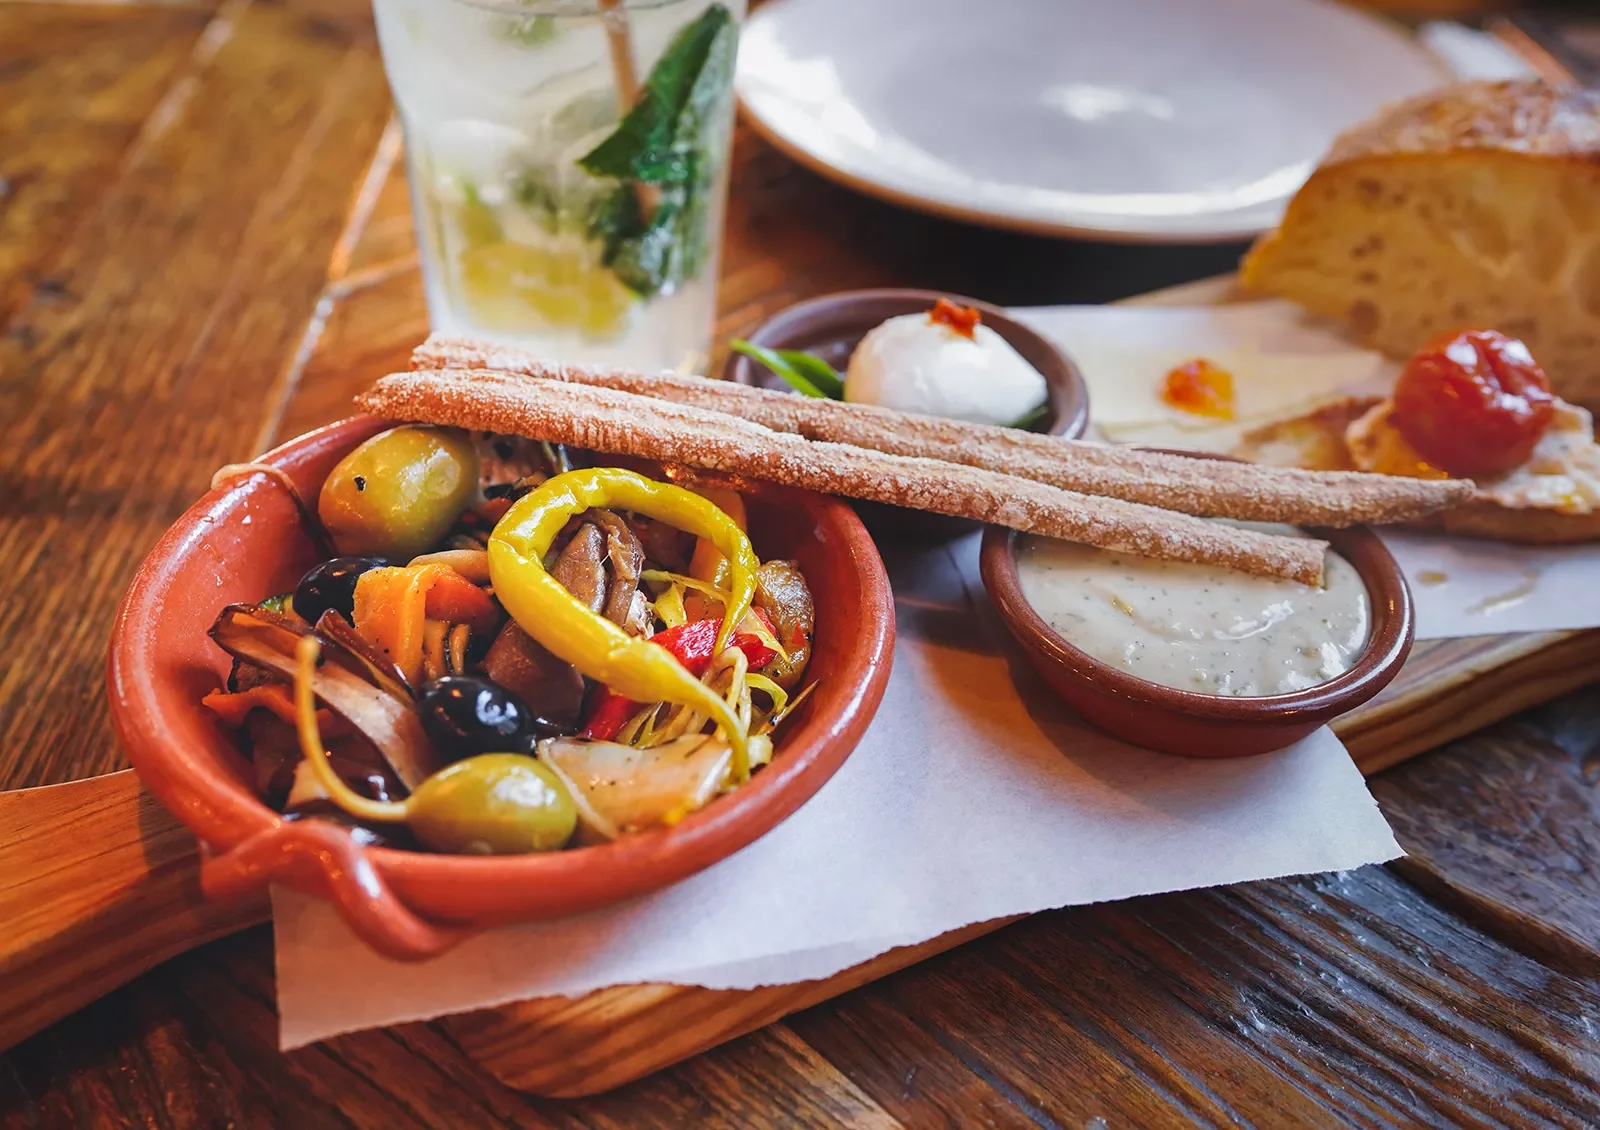 Wooden blank with breadsticks and a small bowl of a mixed vegetable salad